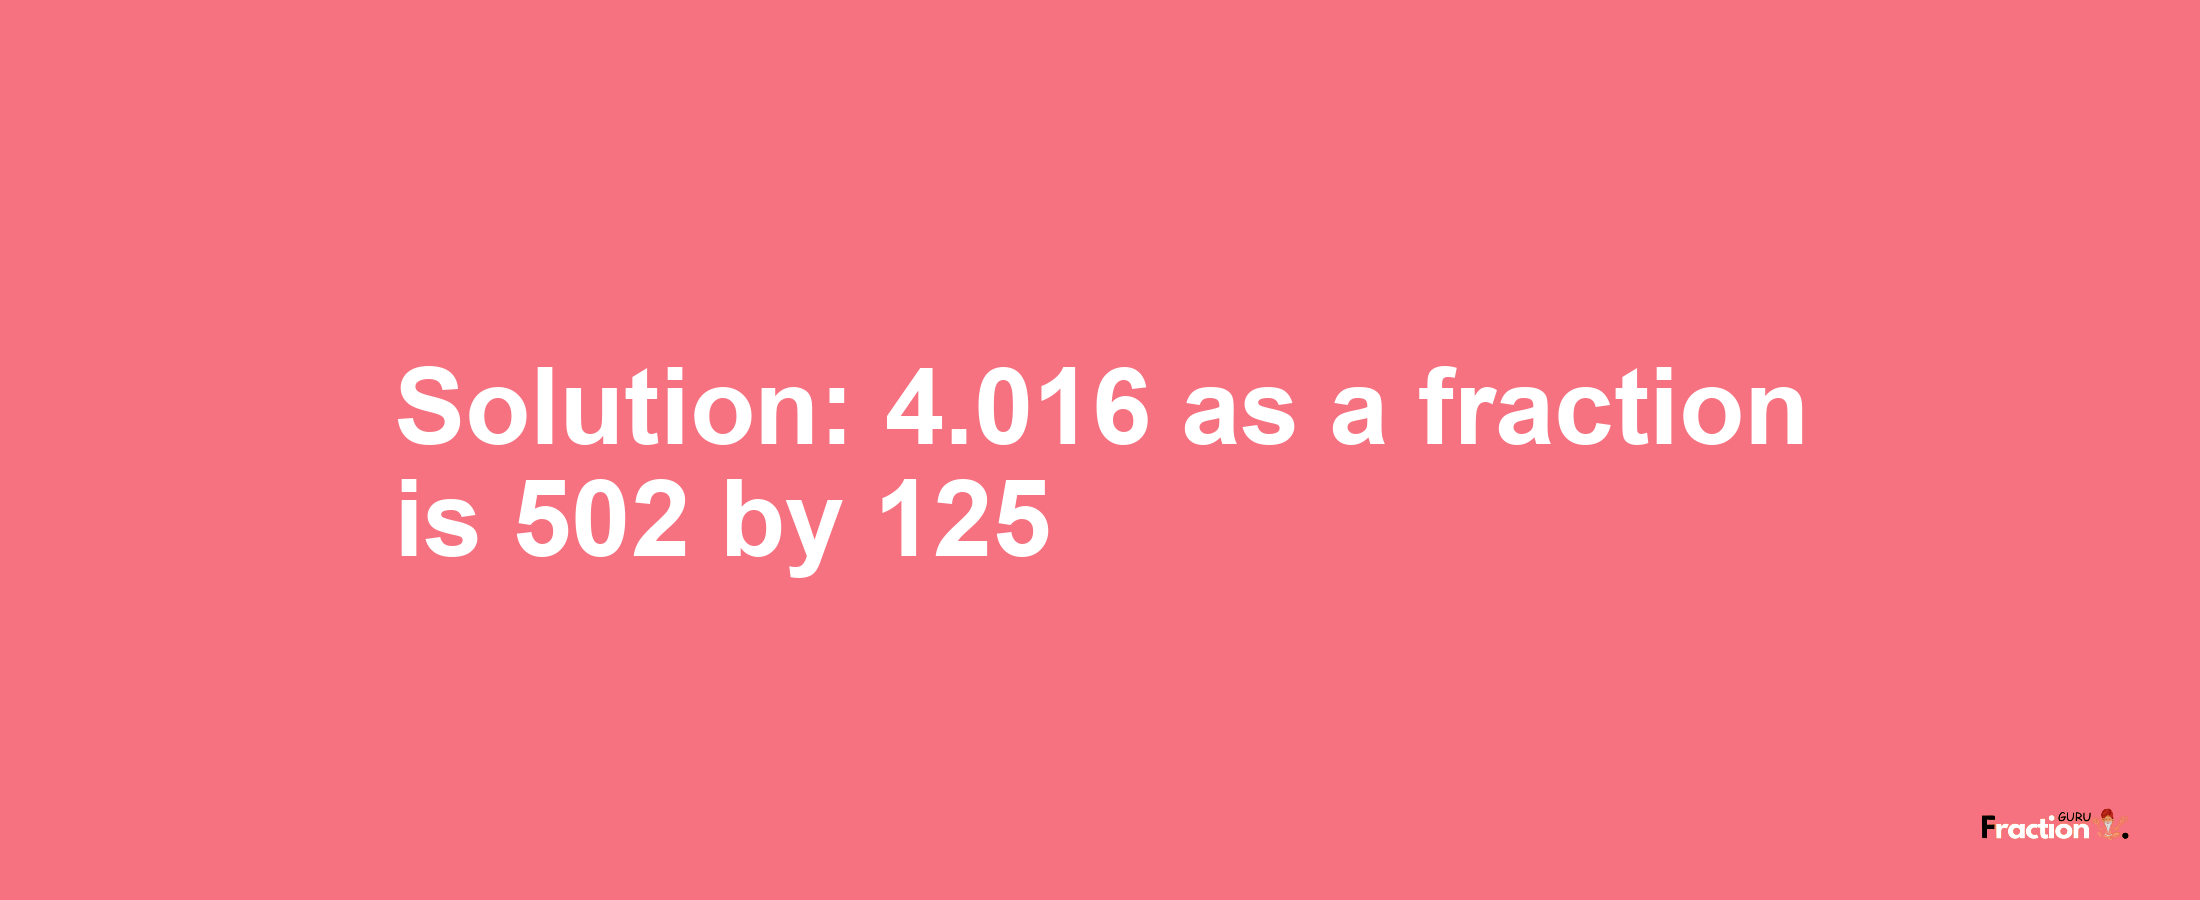 Solution:4.016 as a fraction is 502/125